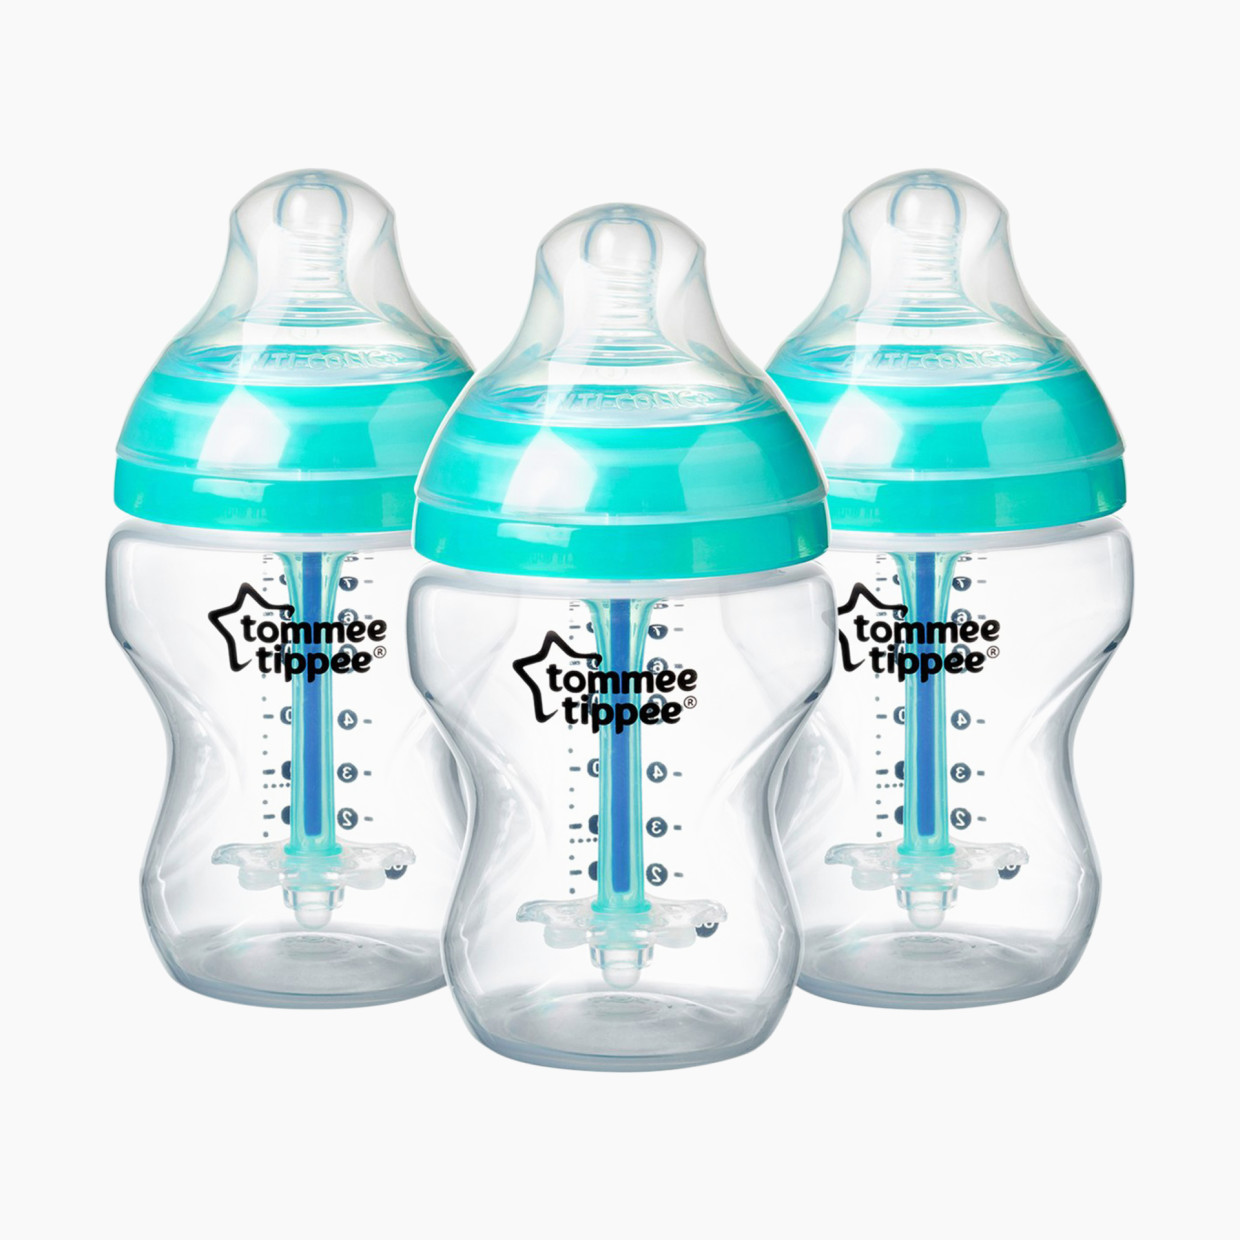 Tommee Tippee Advanced Anti-Colic Bottle - Clear, 9 Oz, 3.